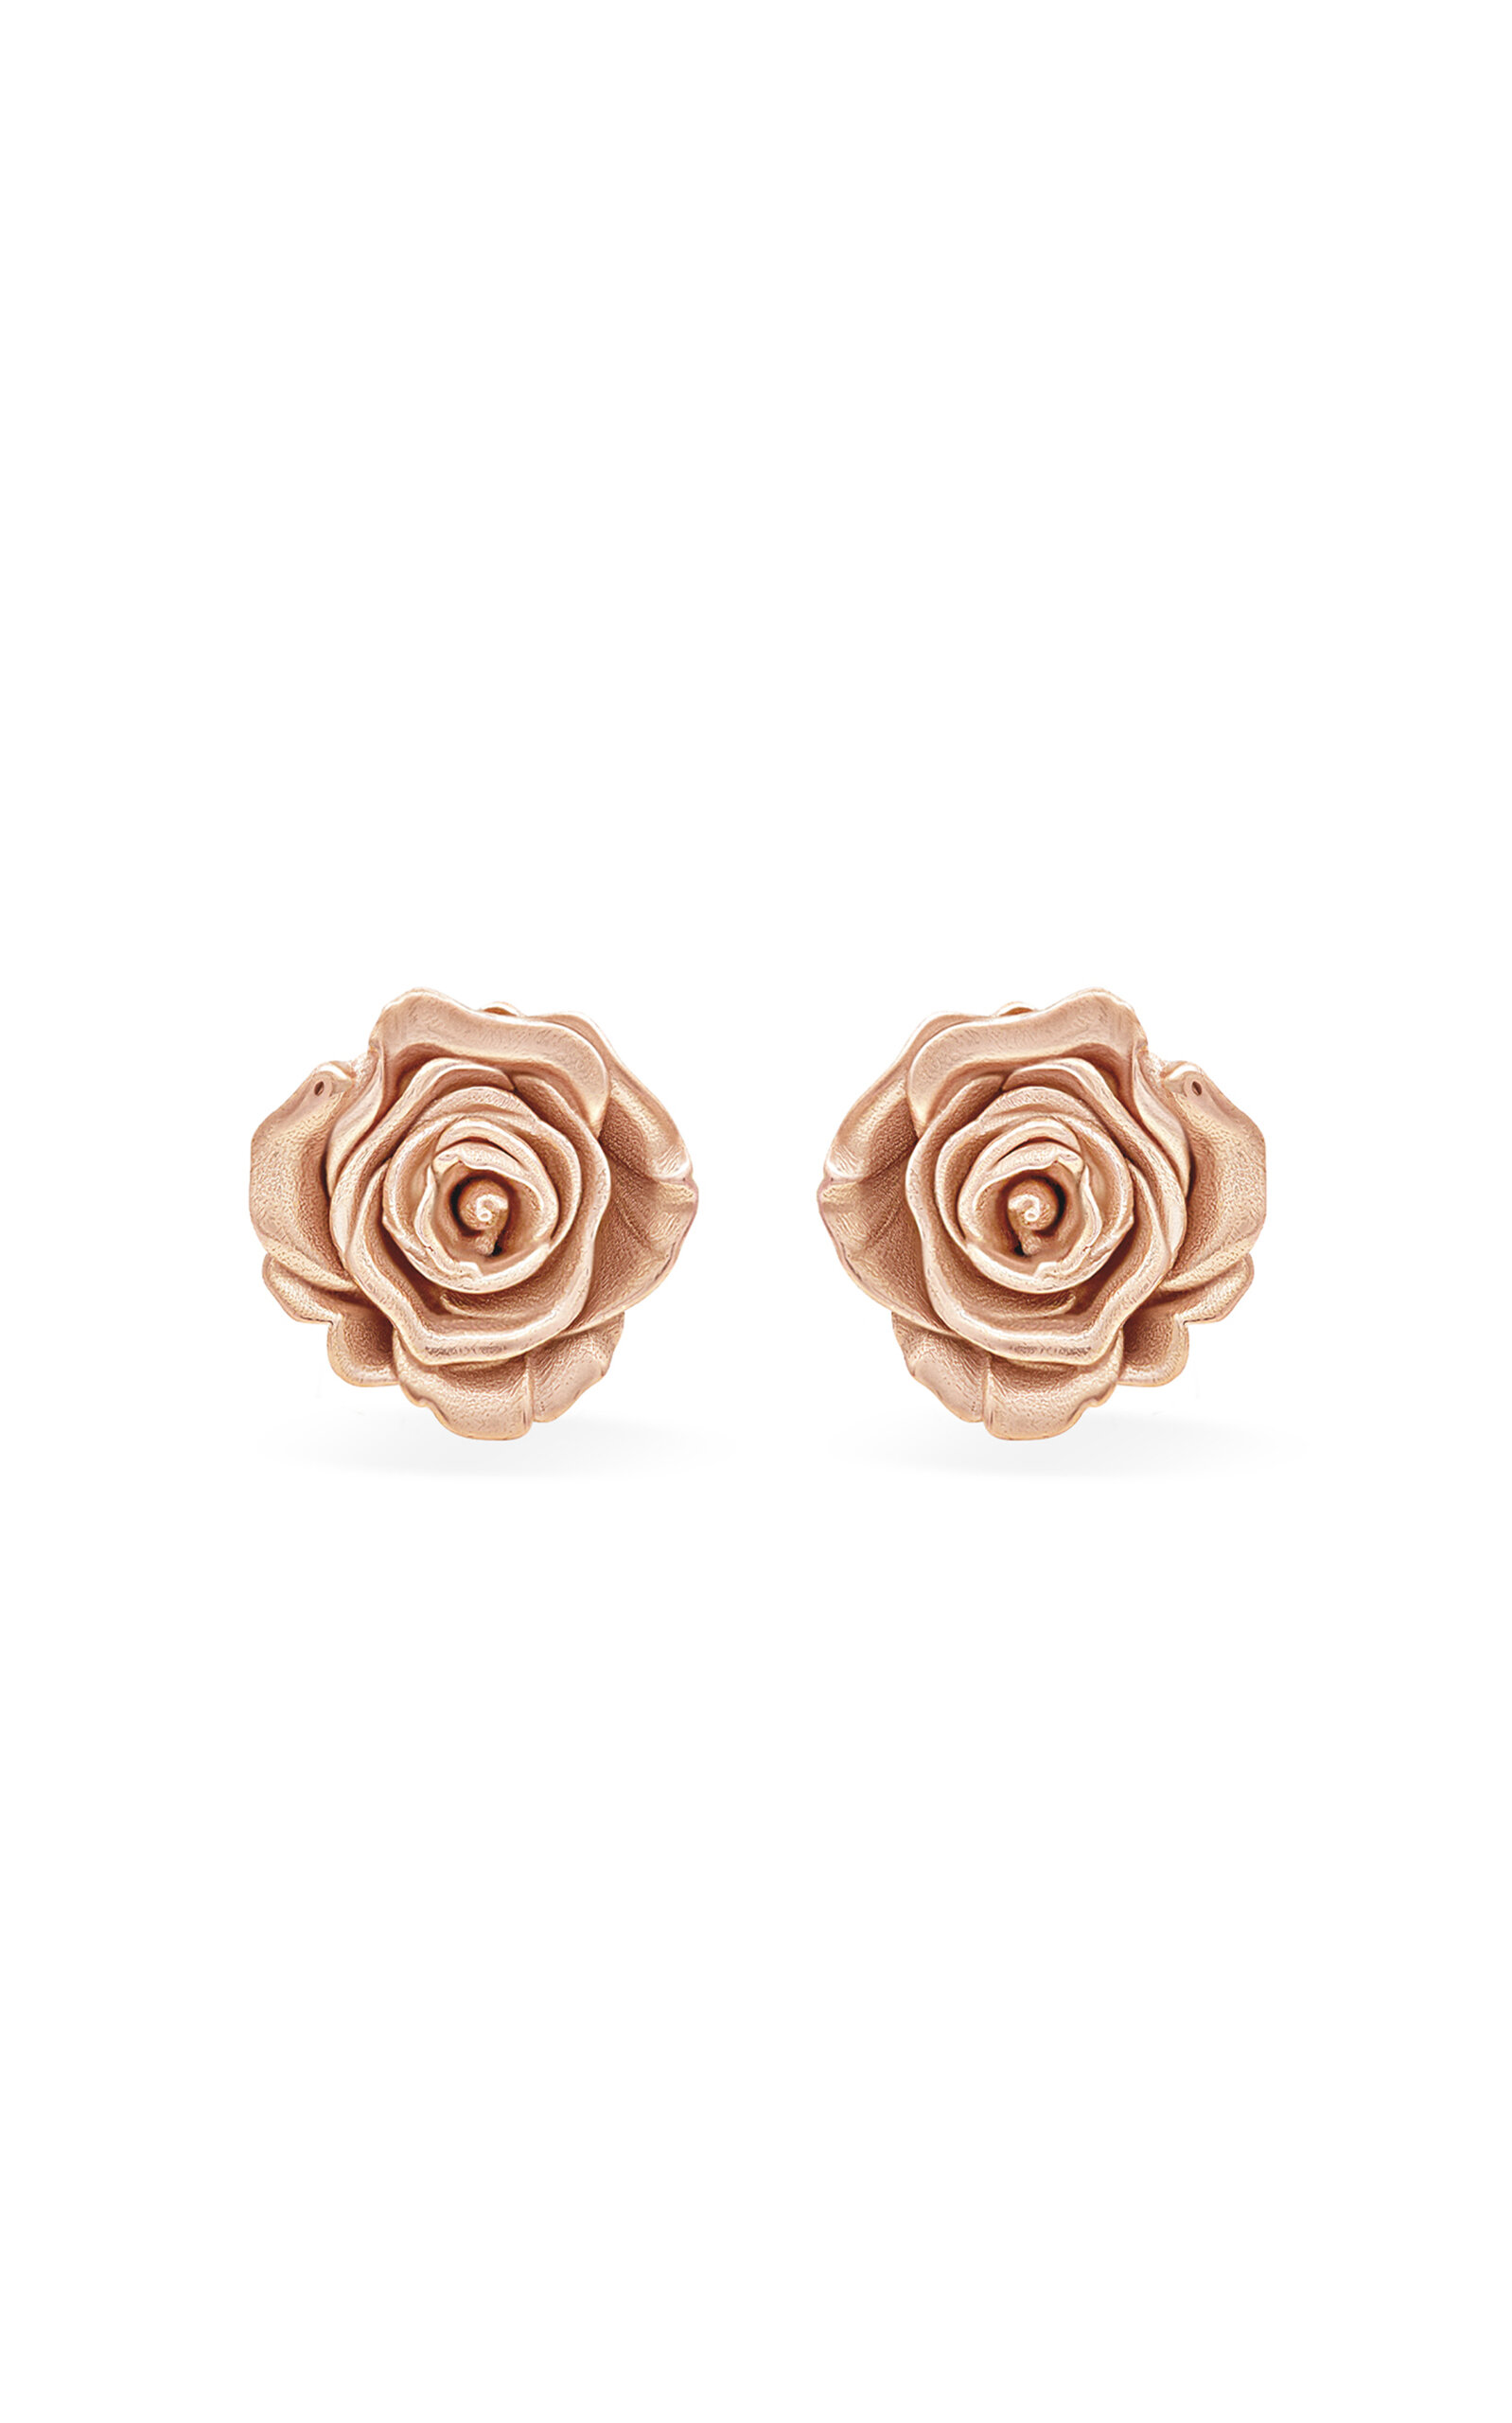 Rosa 14K Rose and Yellow Gold Earrings